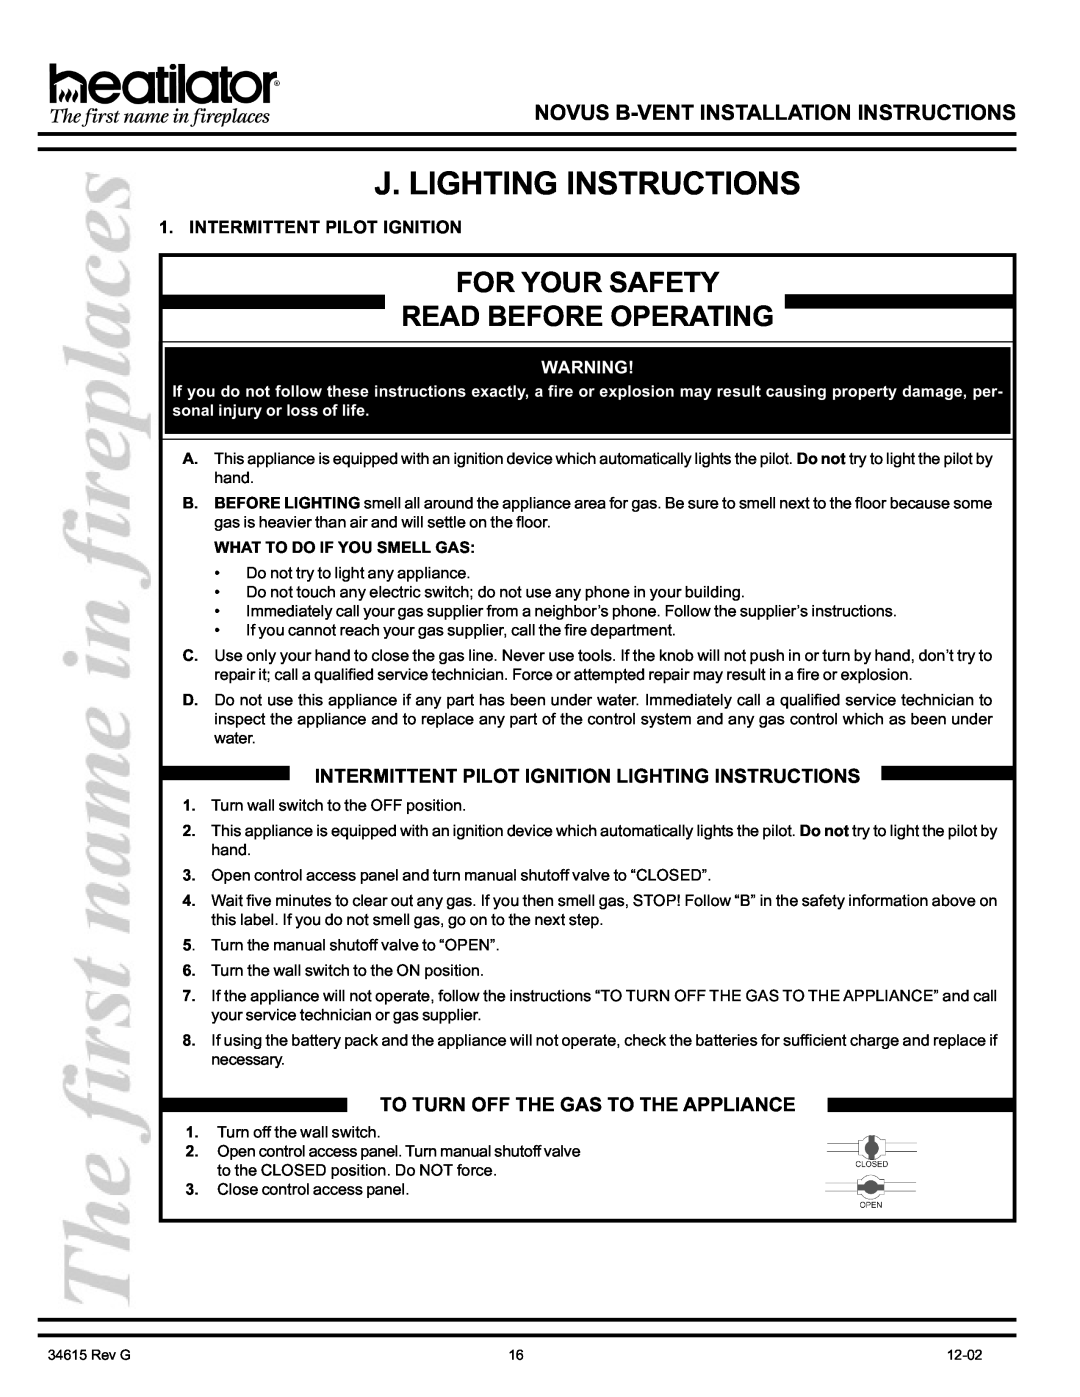 Hearth and Home Technologies GNBC36, GNBC30, GNBC33 manual J. Lighting Instructions, For Your Safety Read Before Operating 